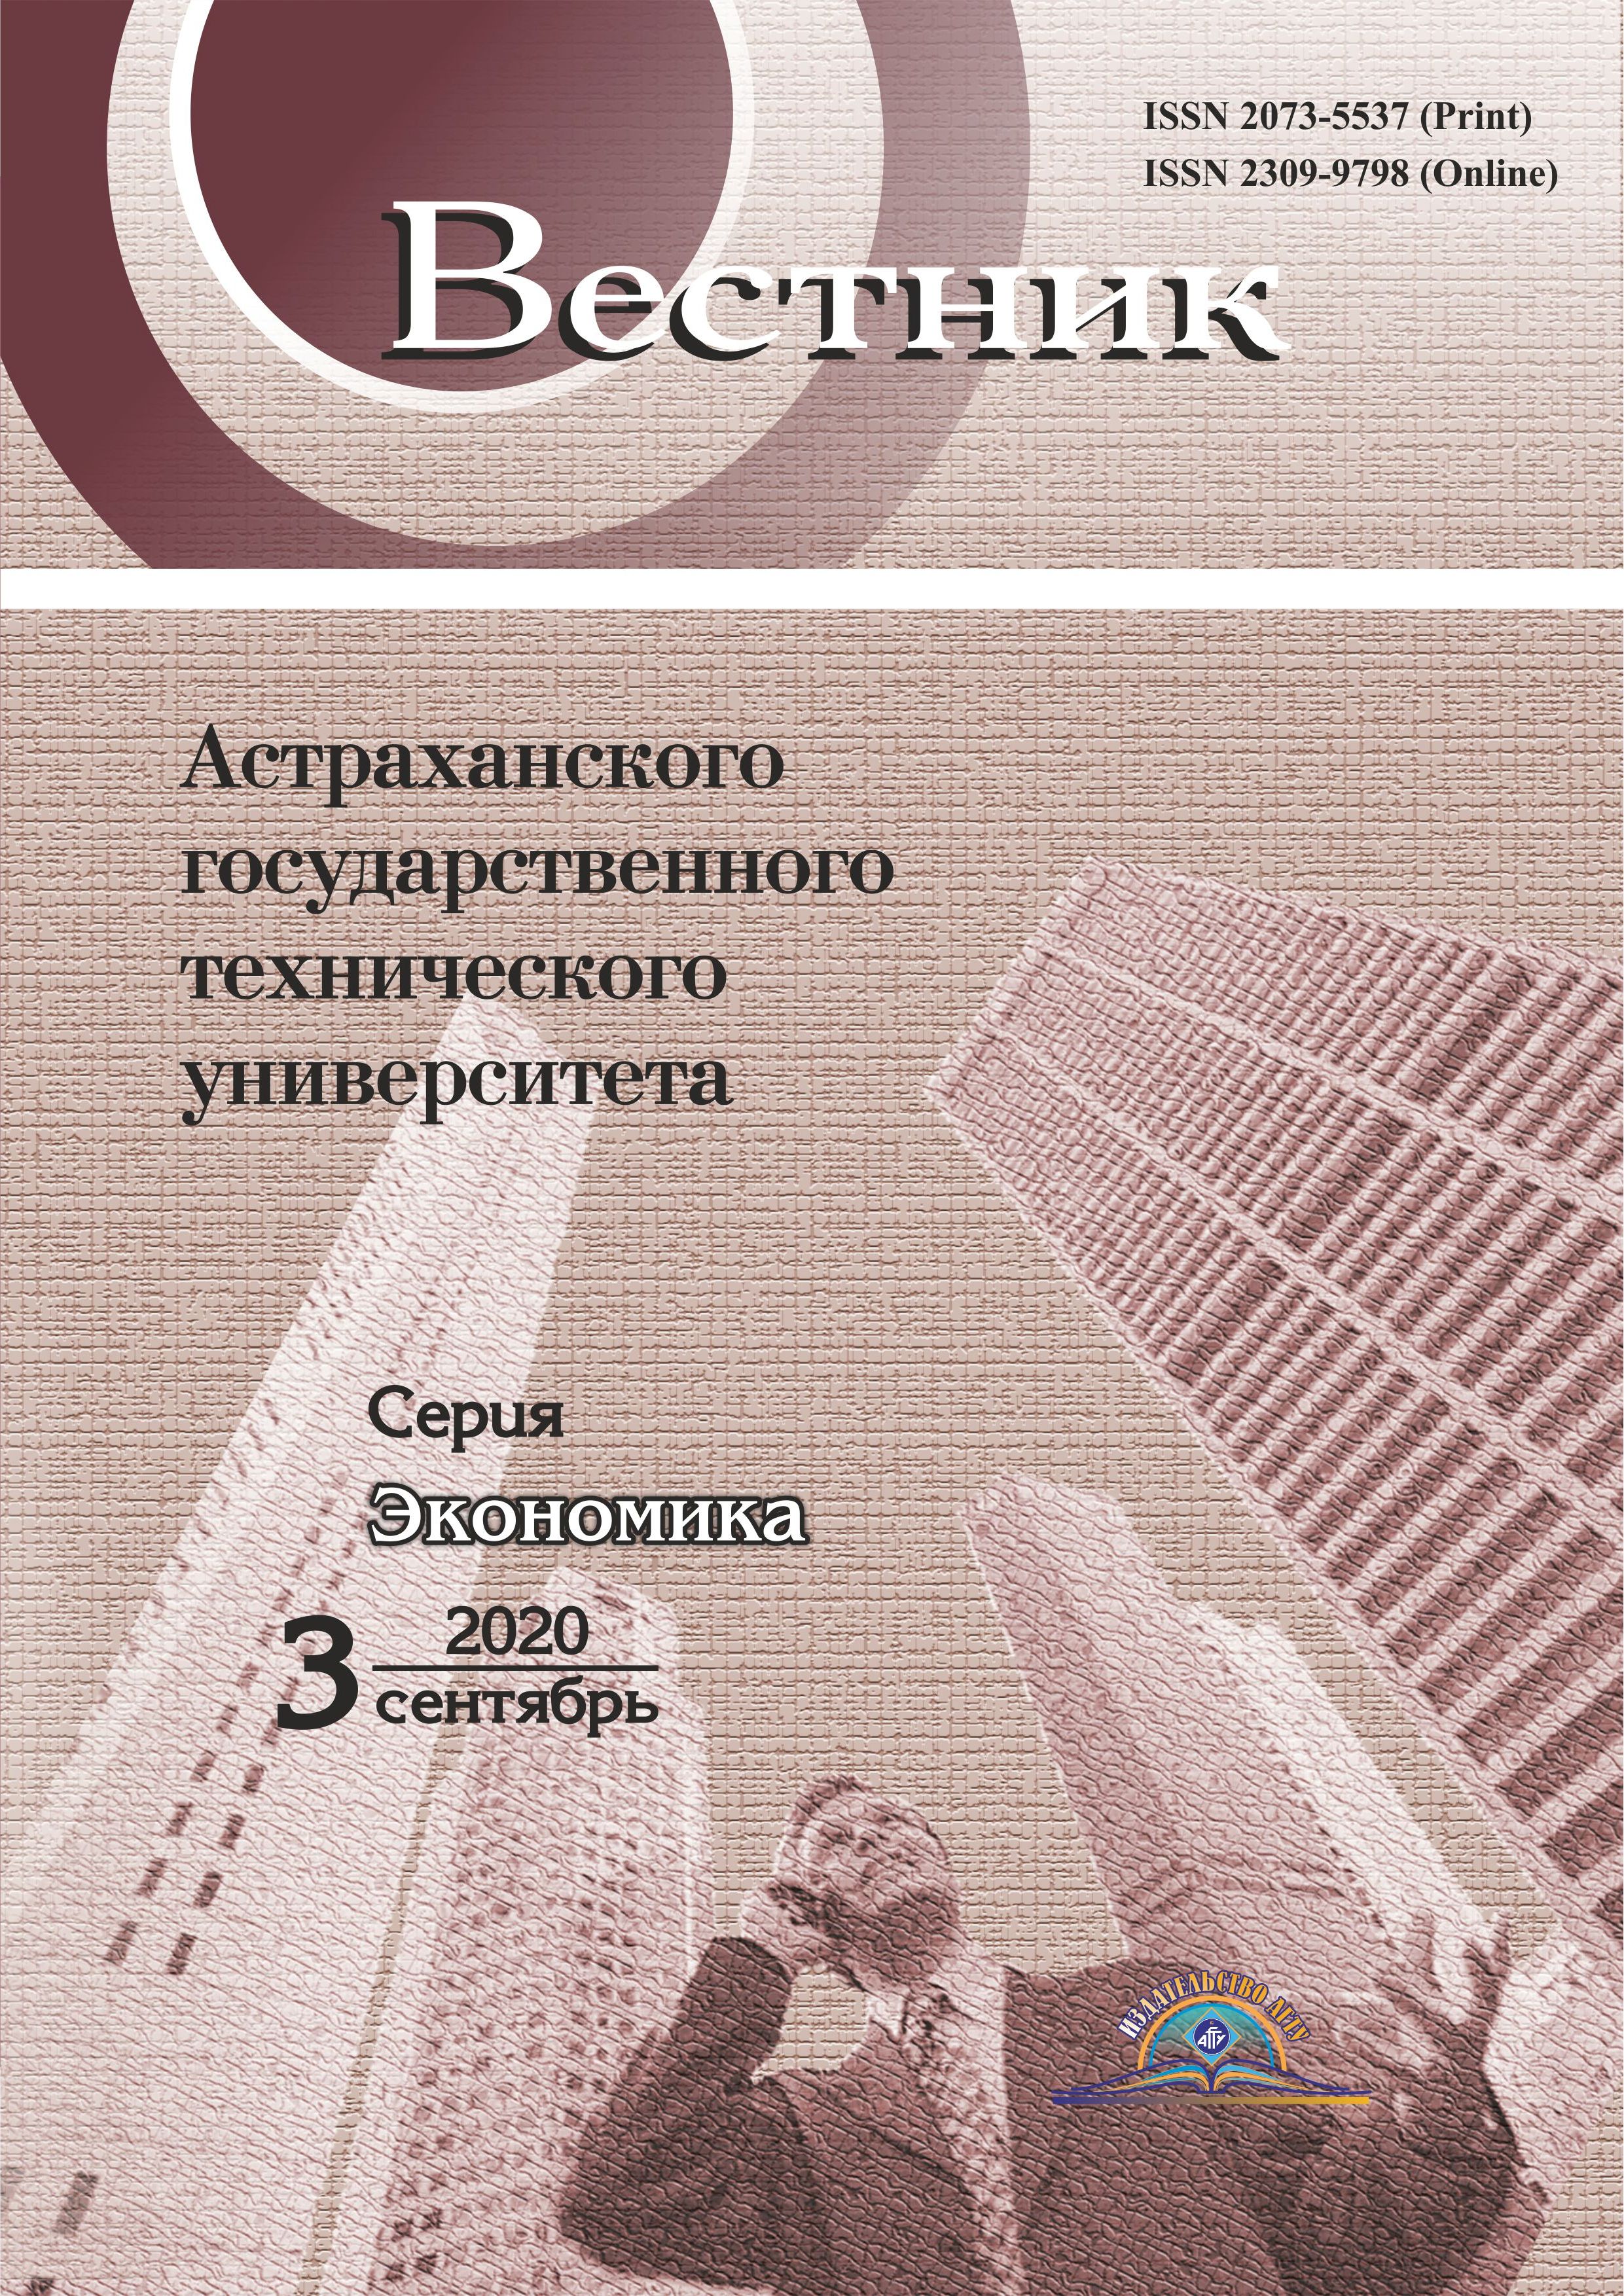                         Aspects of determining consumer basket concerning nonfoods and services for regions of Russian Federation (case study of Astrakhan region).
            